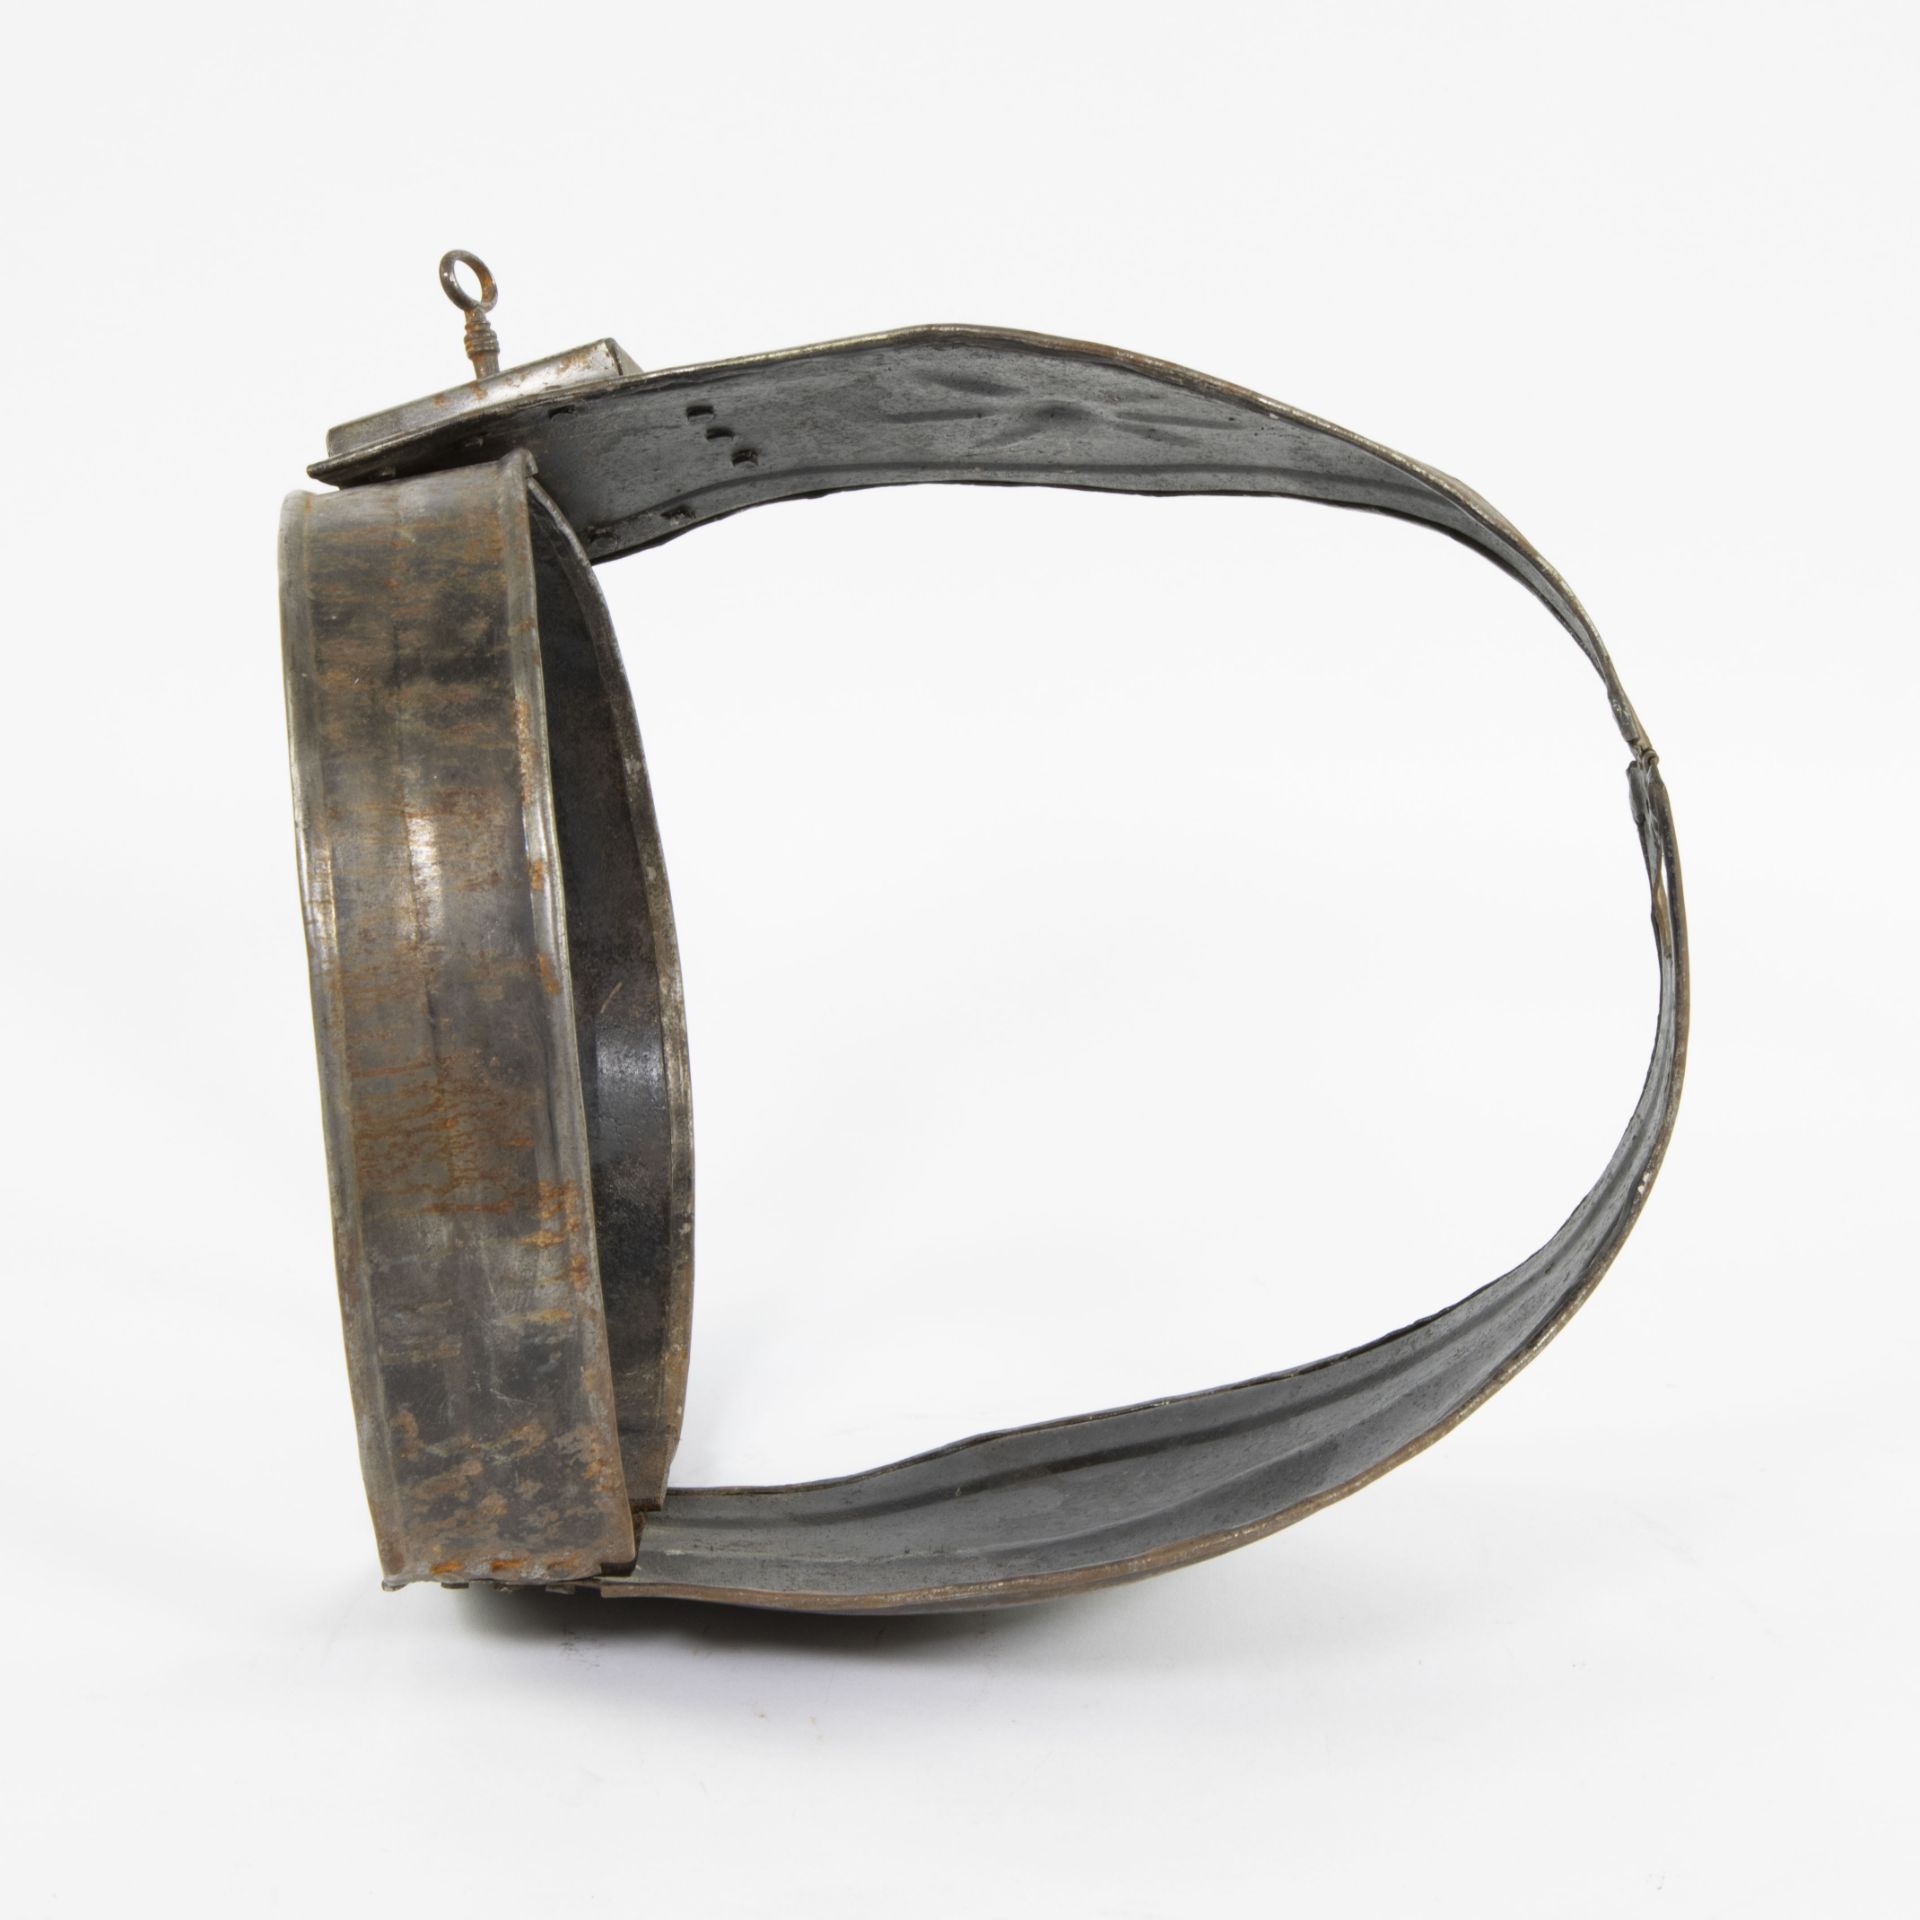 Chastity belt with key - Image 4 of 5